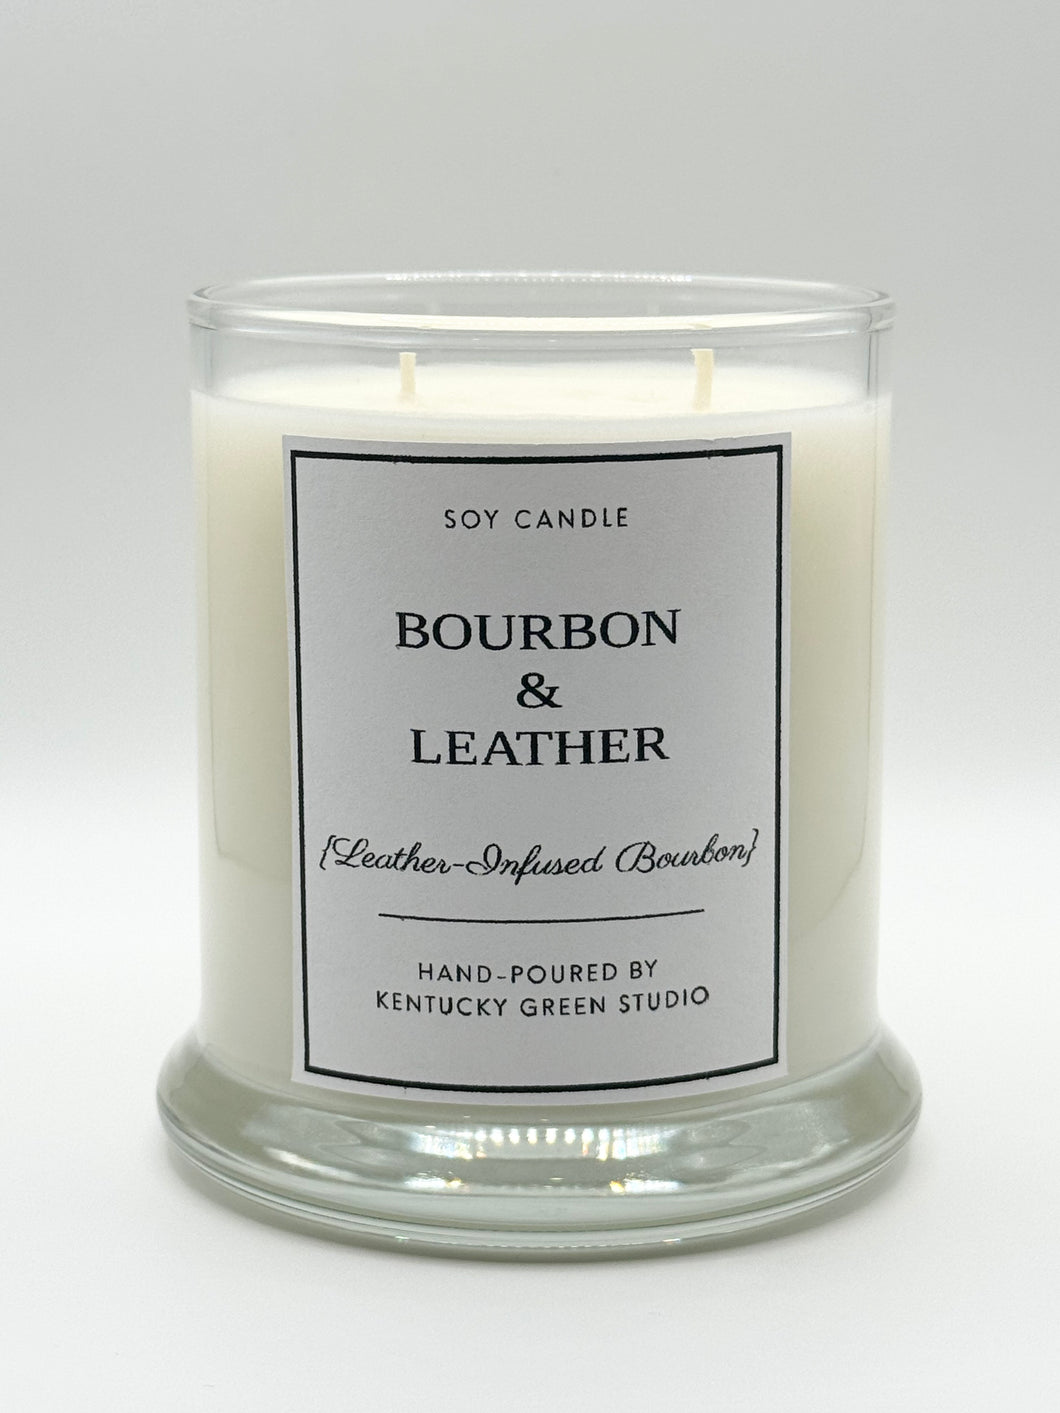 Bourbon & Leather Soy Candle